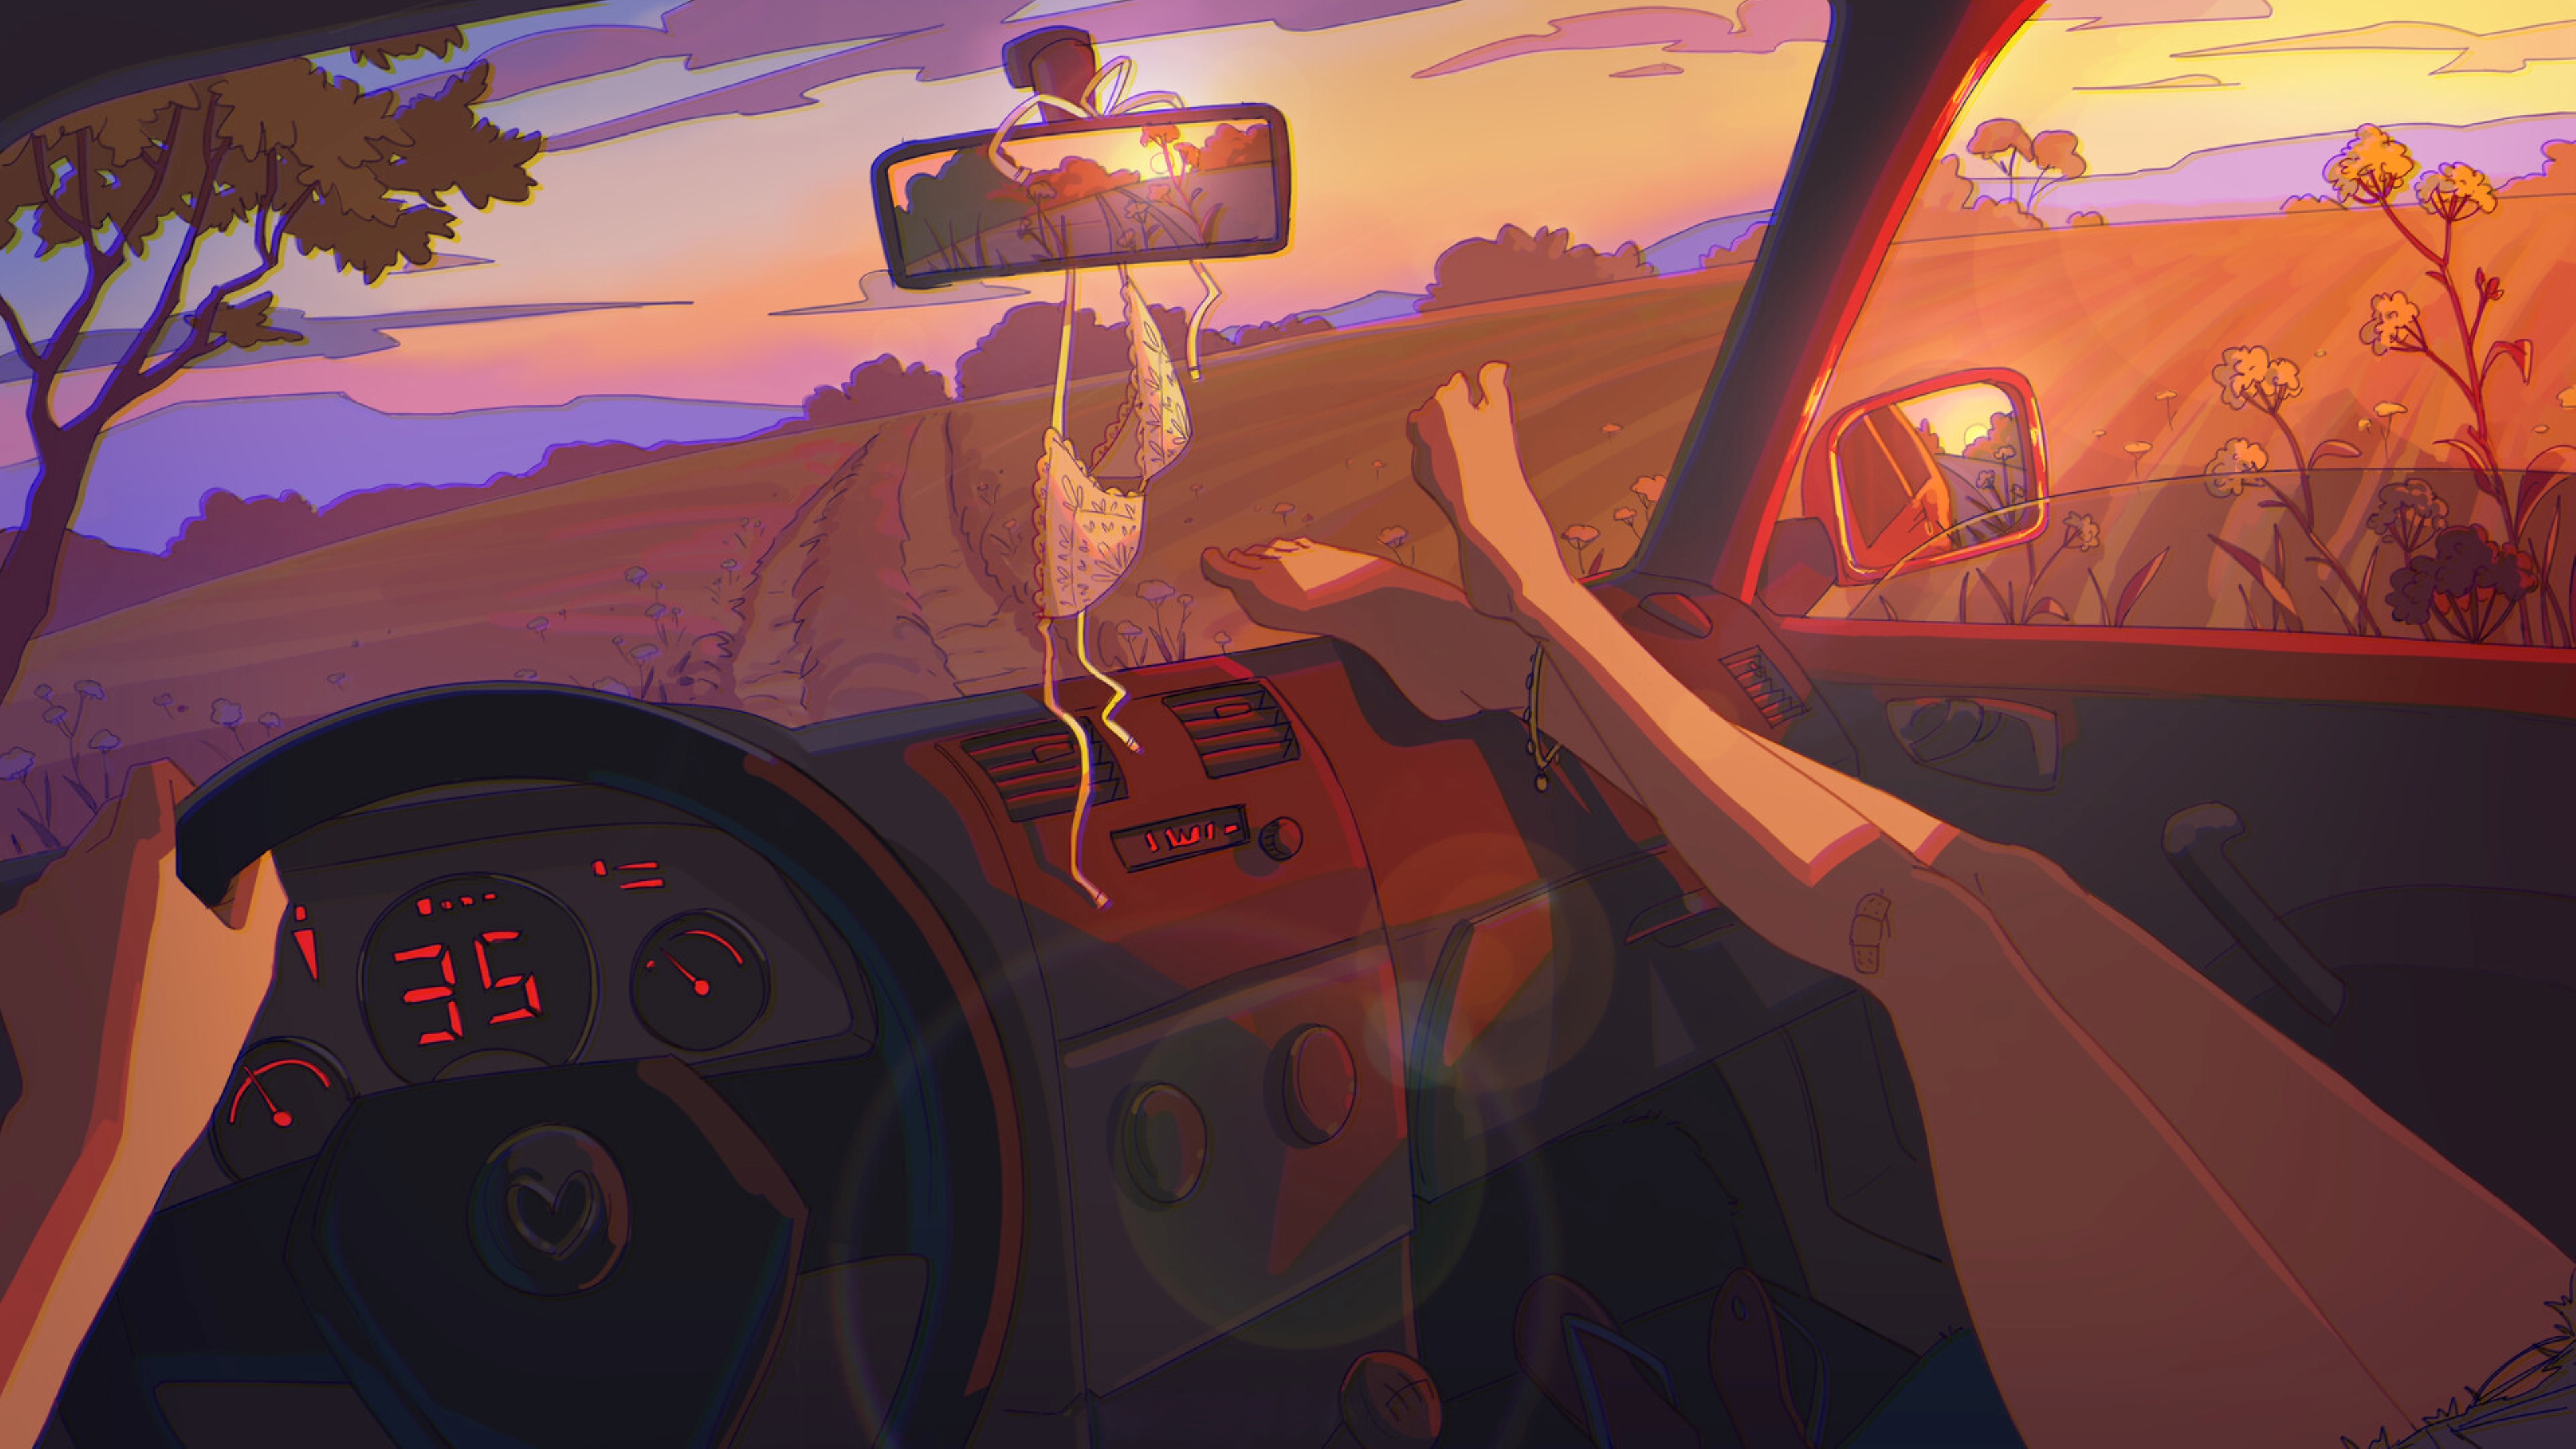 Digital Art Sunset Chill Out Car Interior Relaxing Peaceful Legs Crossed Farm Speedometer Steering W 3840x2160